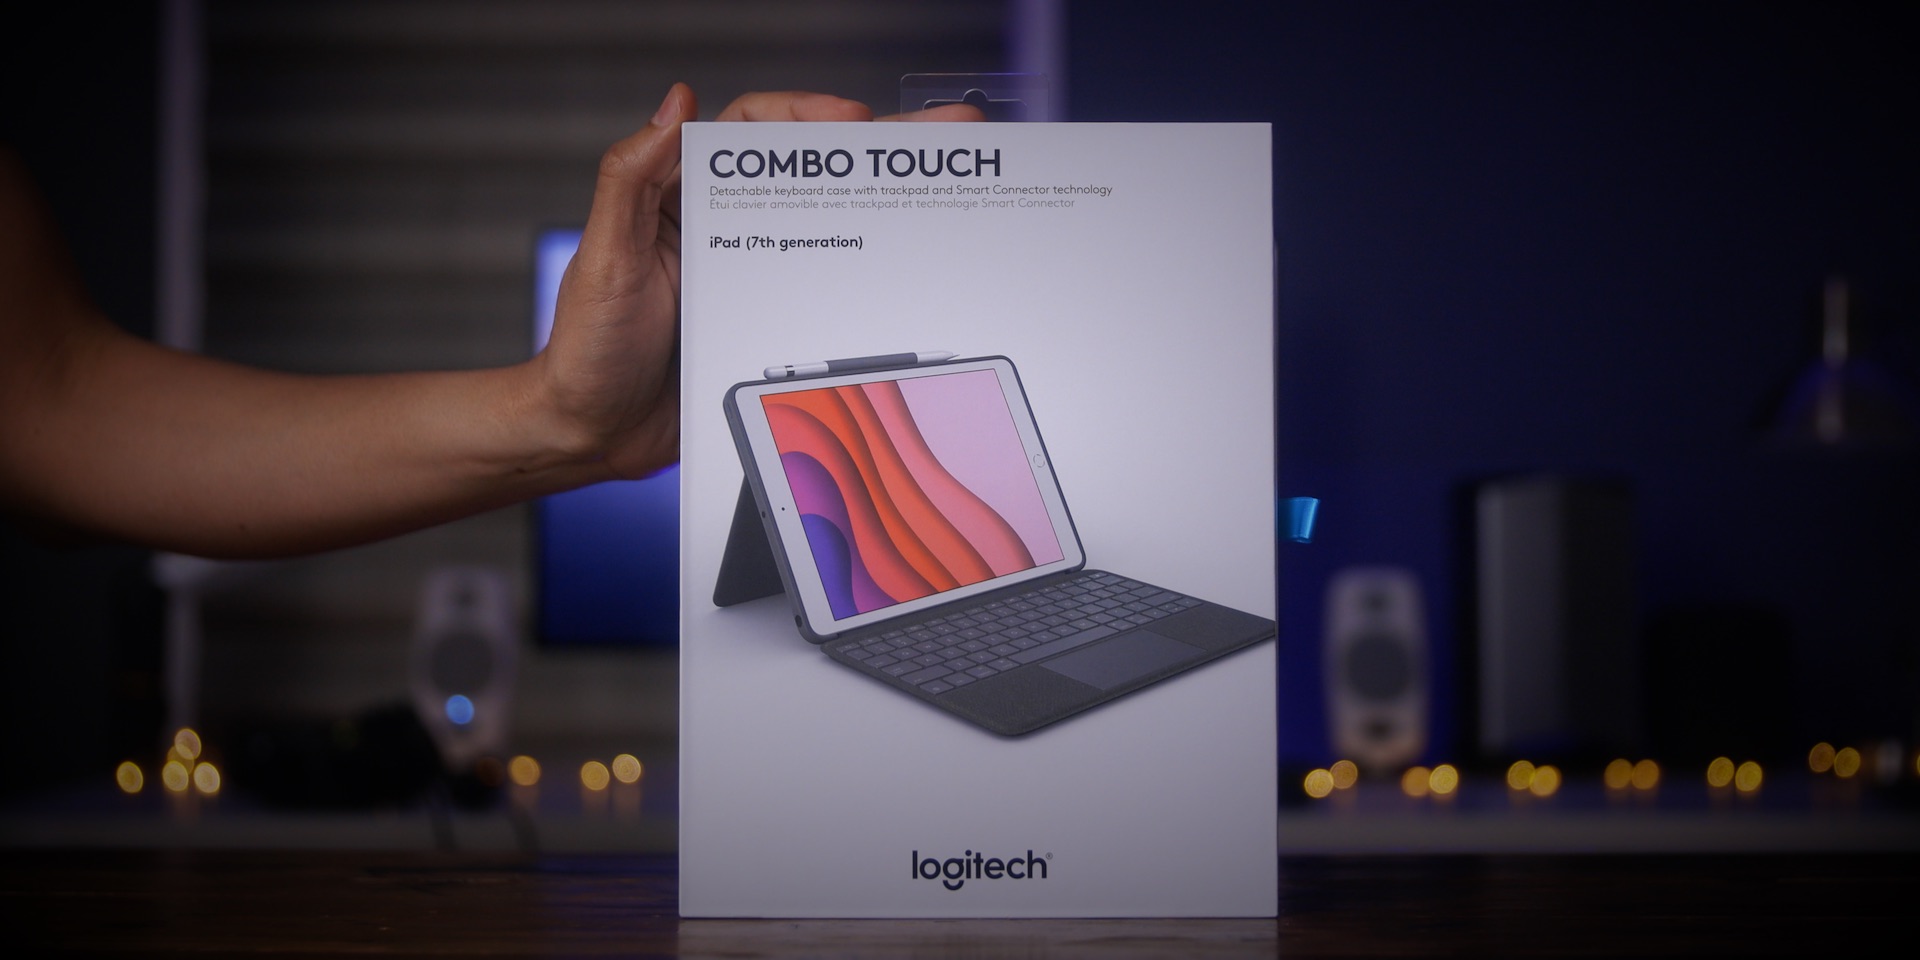 Logitech Combo Touch Backlit Keyboard Case with Trackpad for Pad